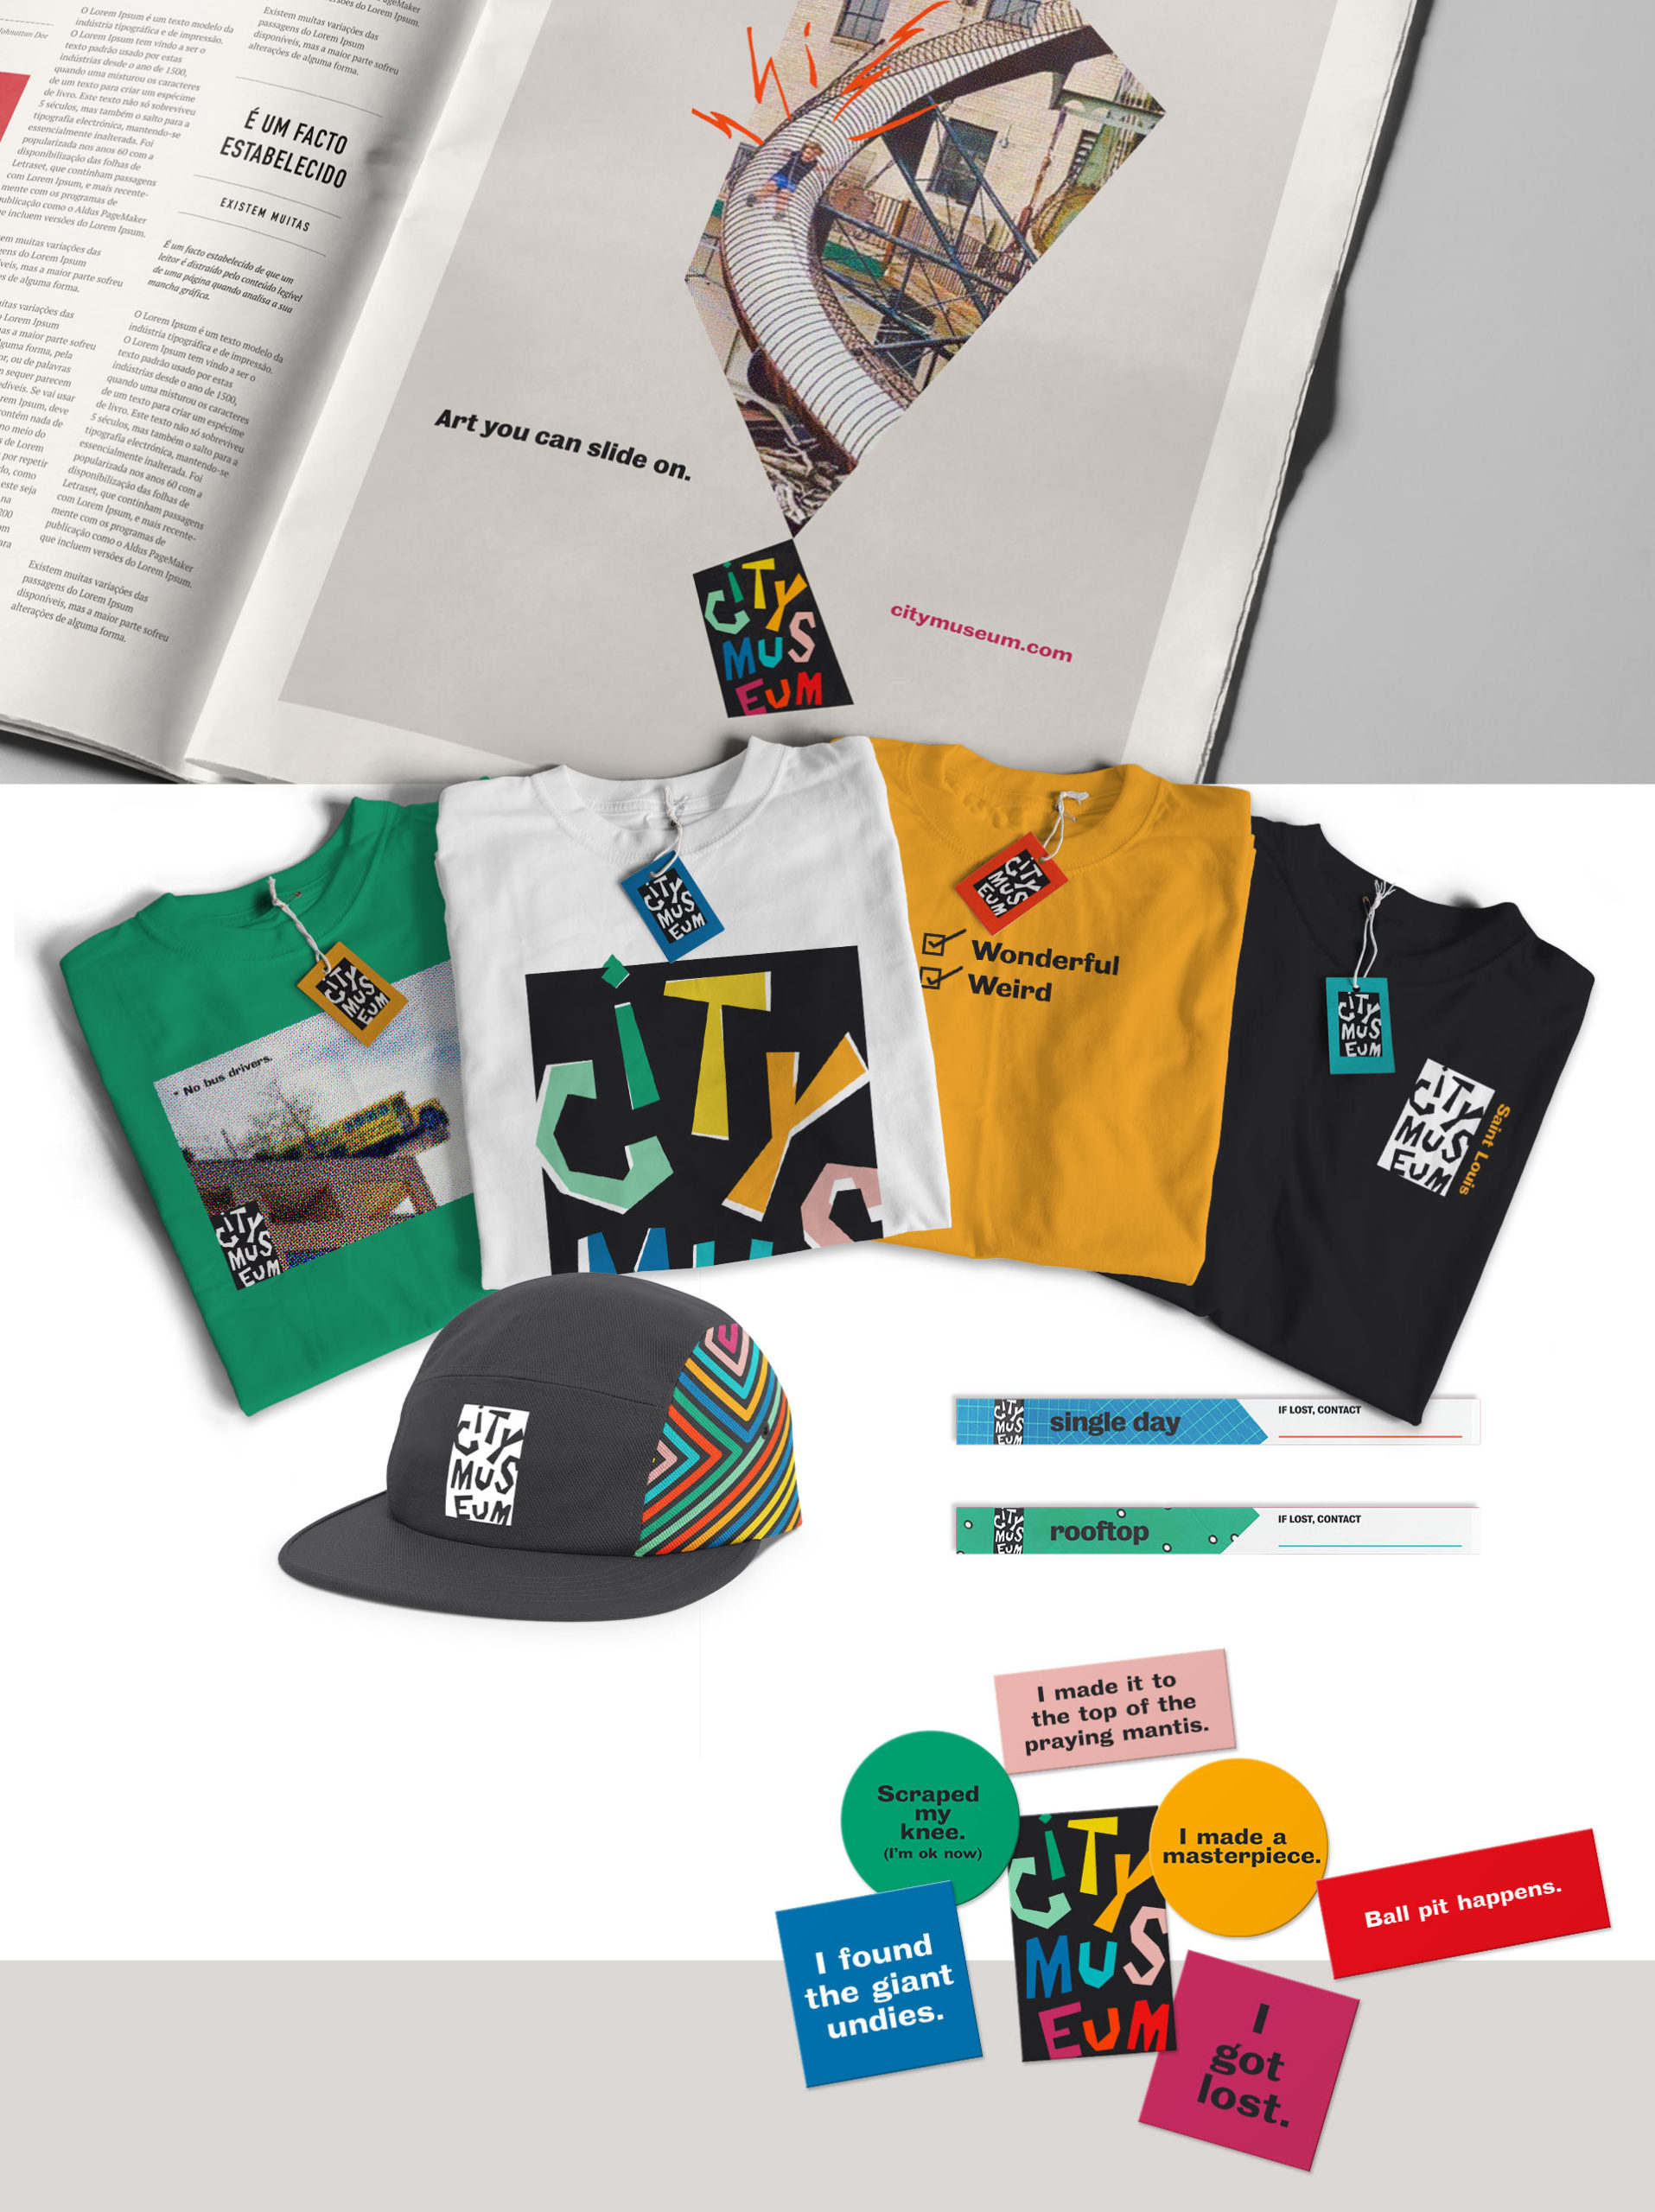 Expressions of City Museum's new branding, including t-shirts, stickers and a print ad